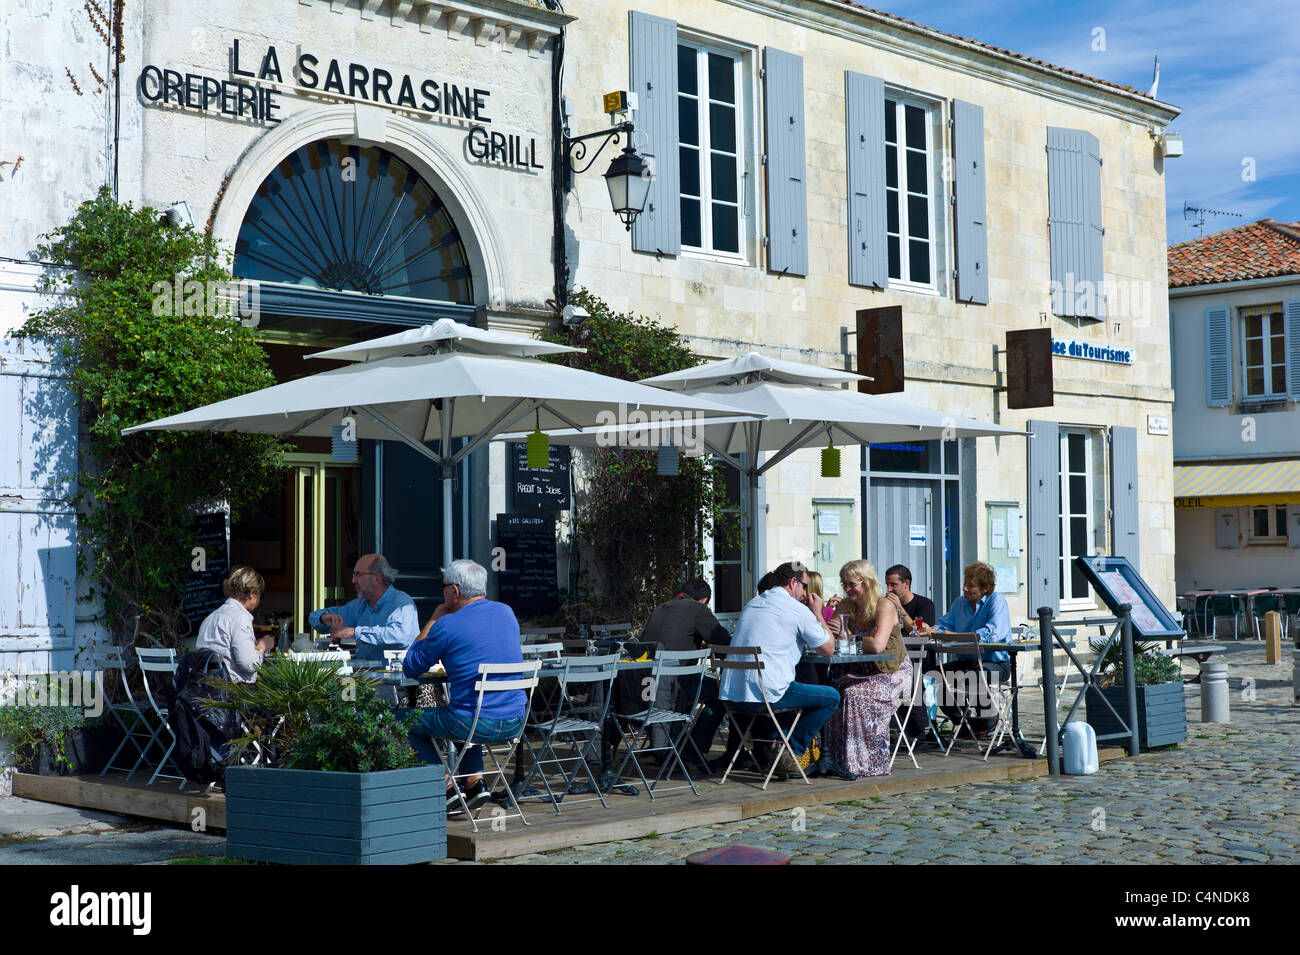 Traditional French street cafe, La Sarrasine Creperie and Grill at St Martin de Re, Ile de Re, France Stock Photo